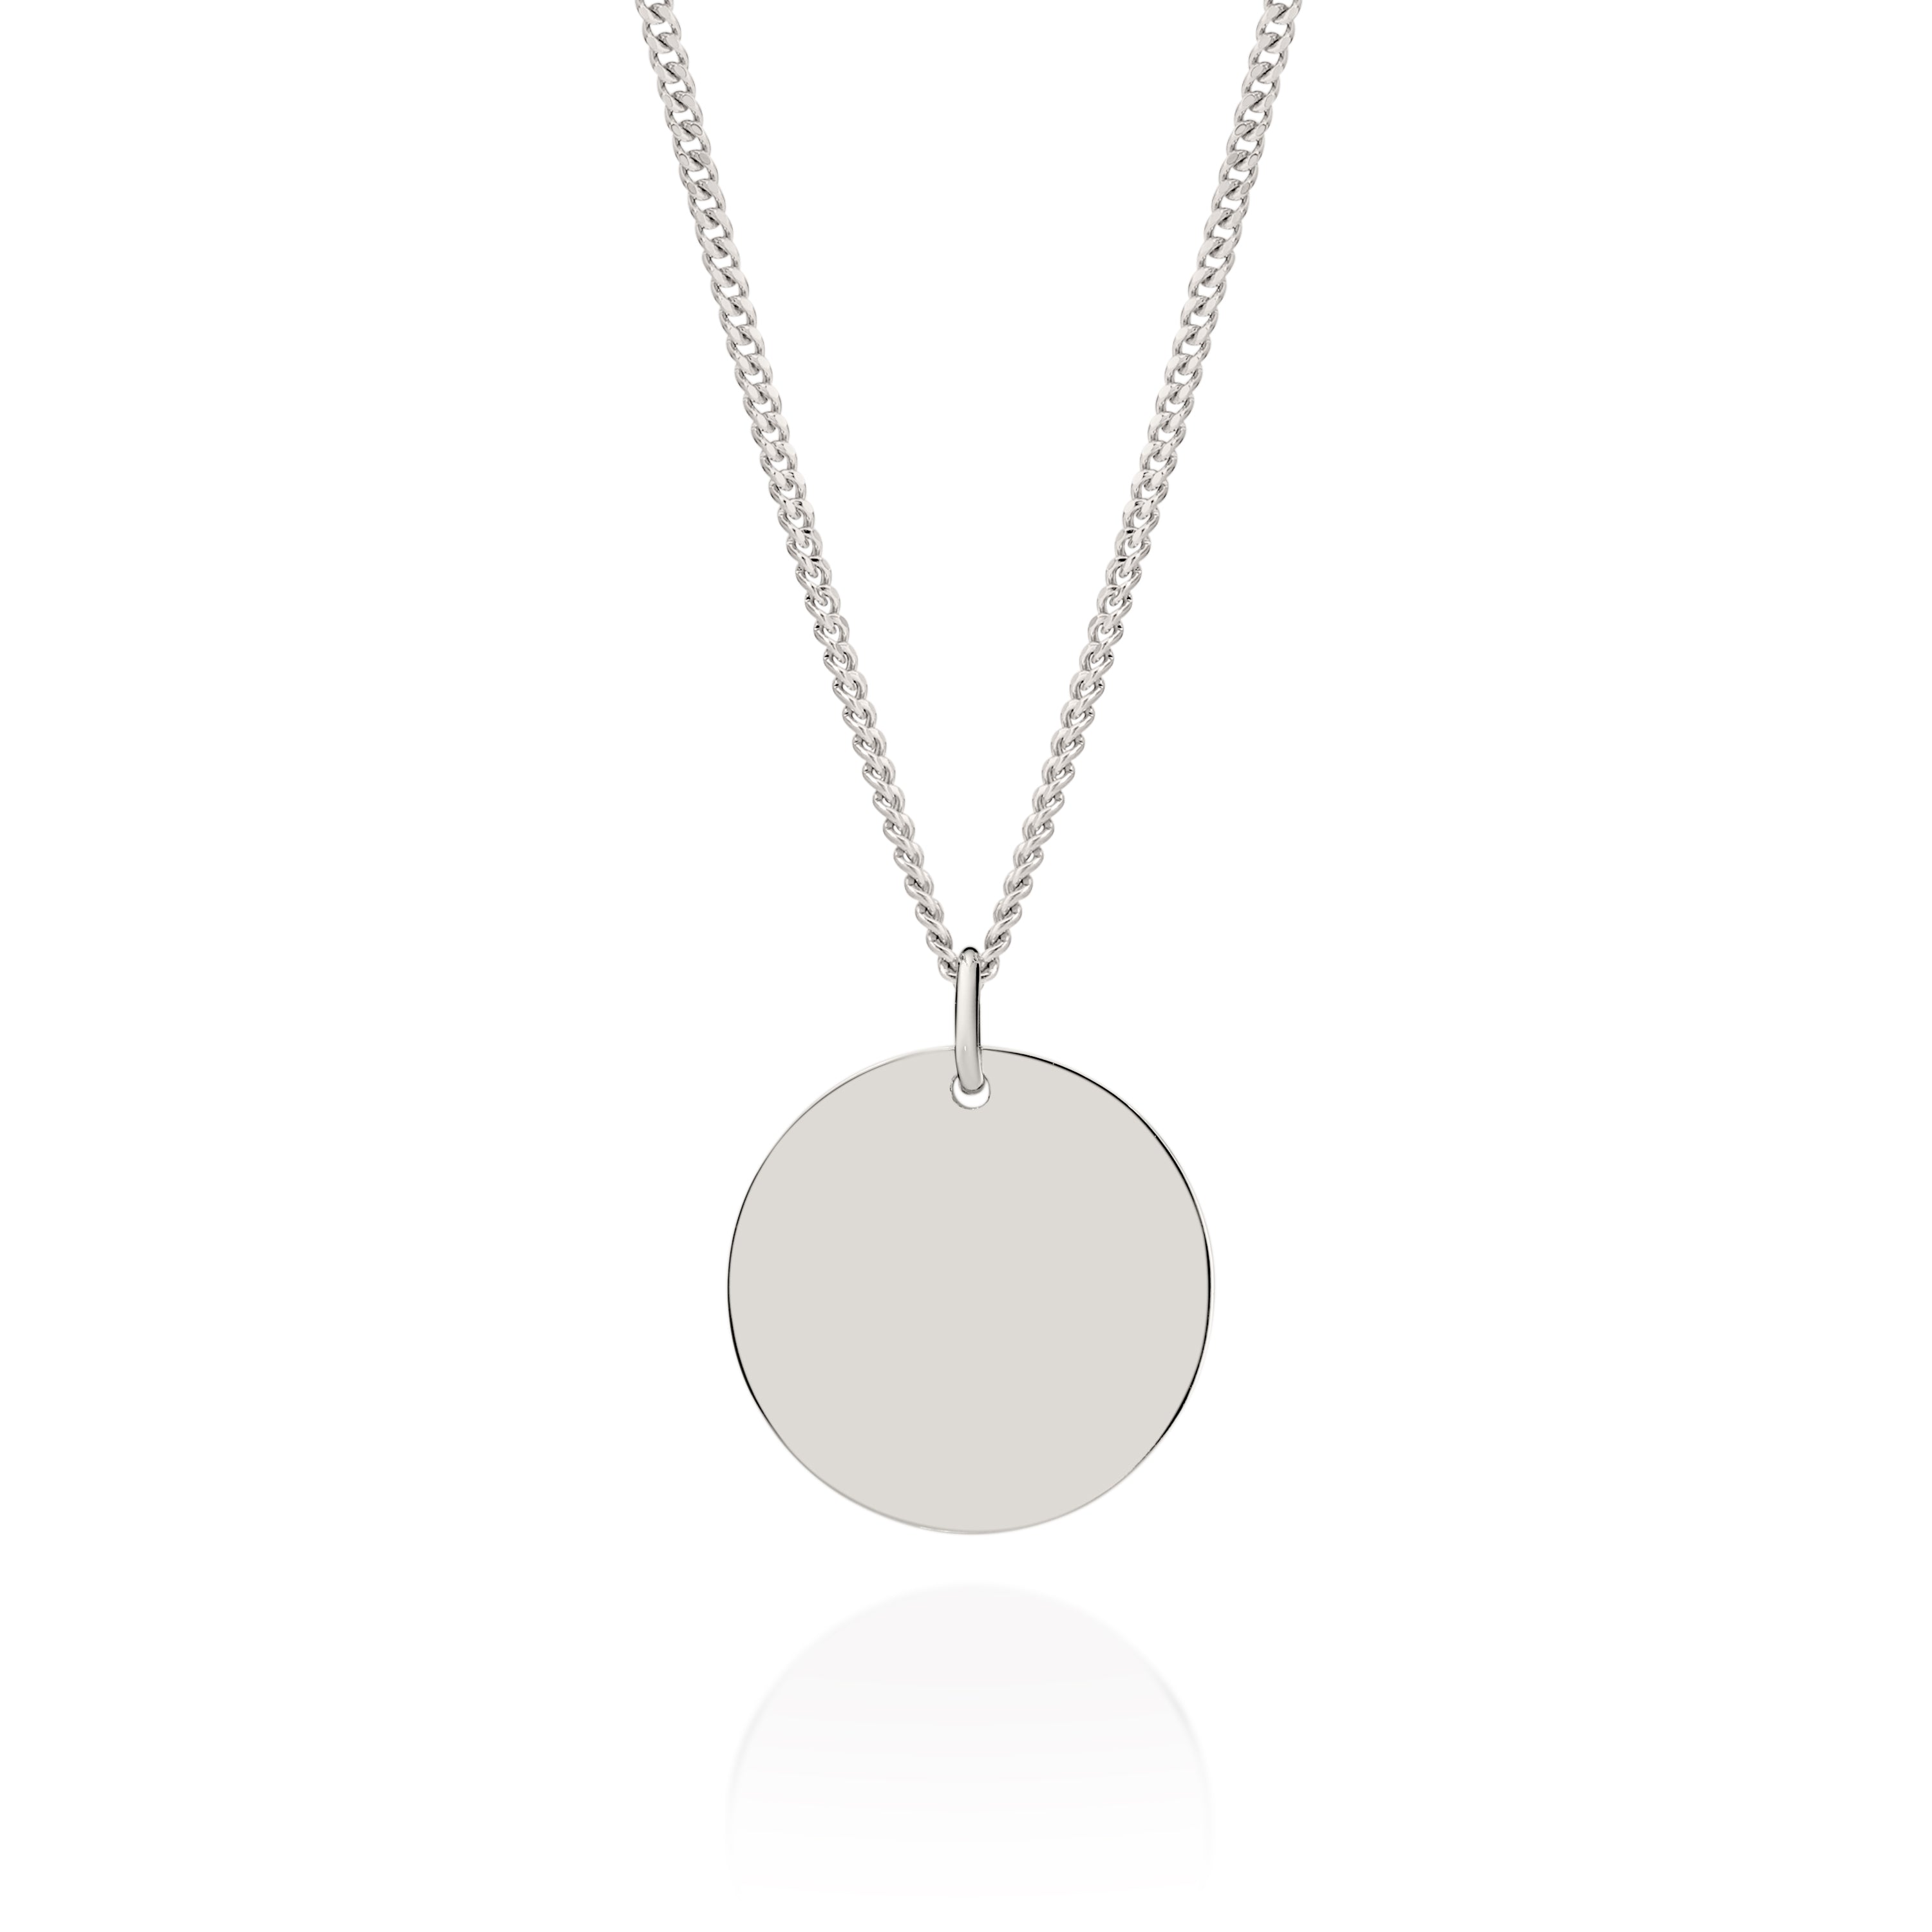 20mm Round Engravable Disc Sterling Silver